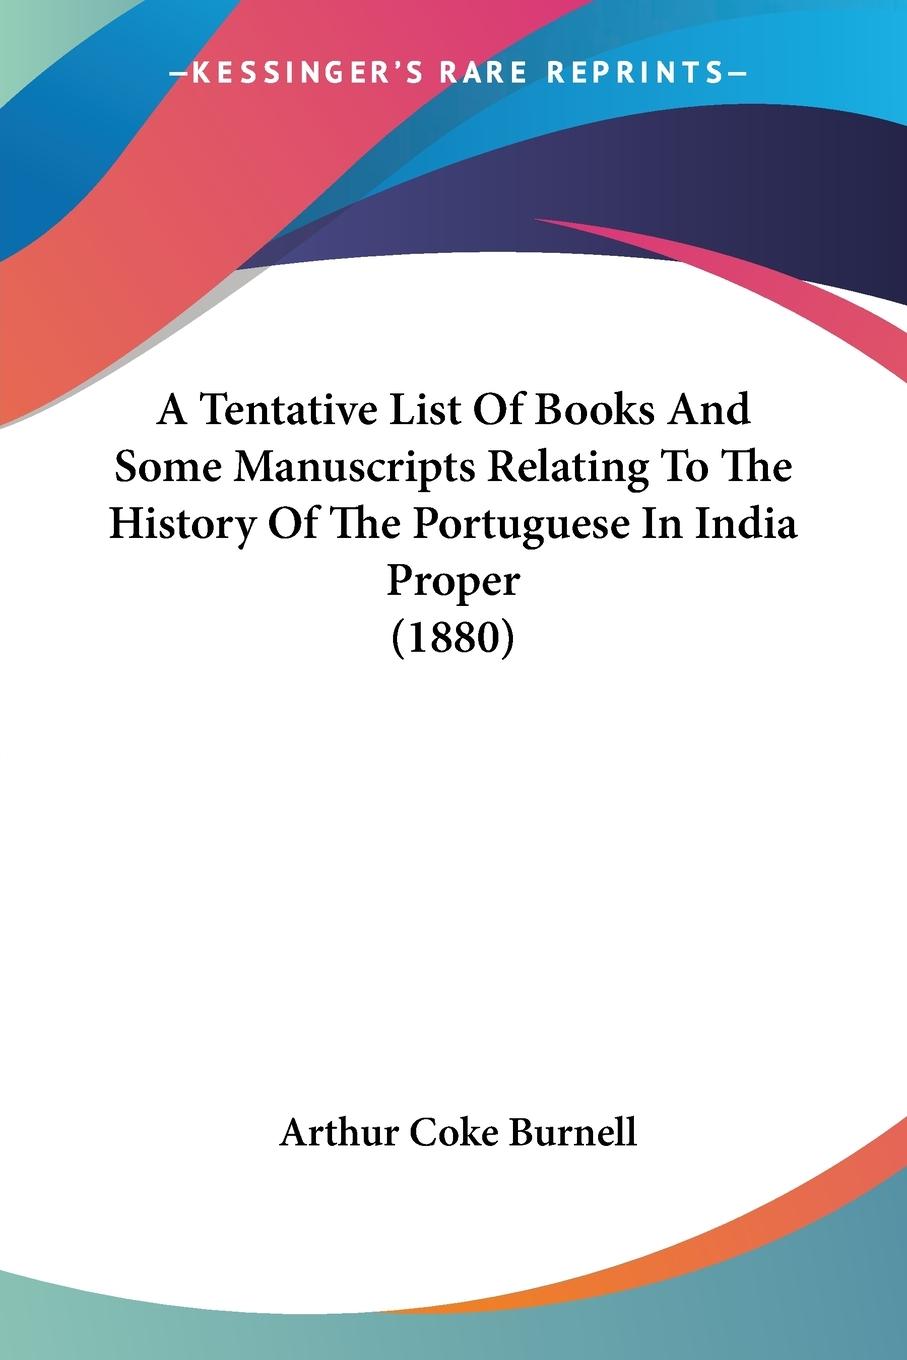 A Tentative List Of Books And Some Manuscripts Relating To The History Of The Portuguese In India Proper (1880) - Burnell, Arthur Coke